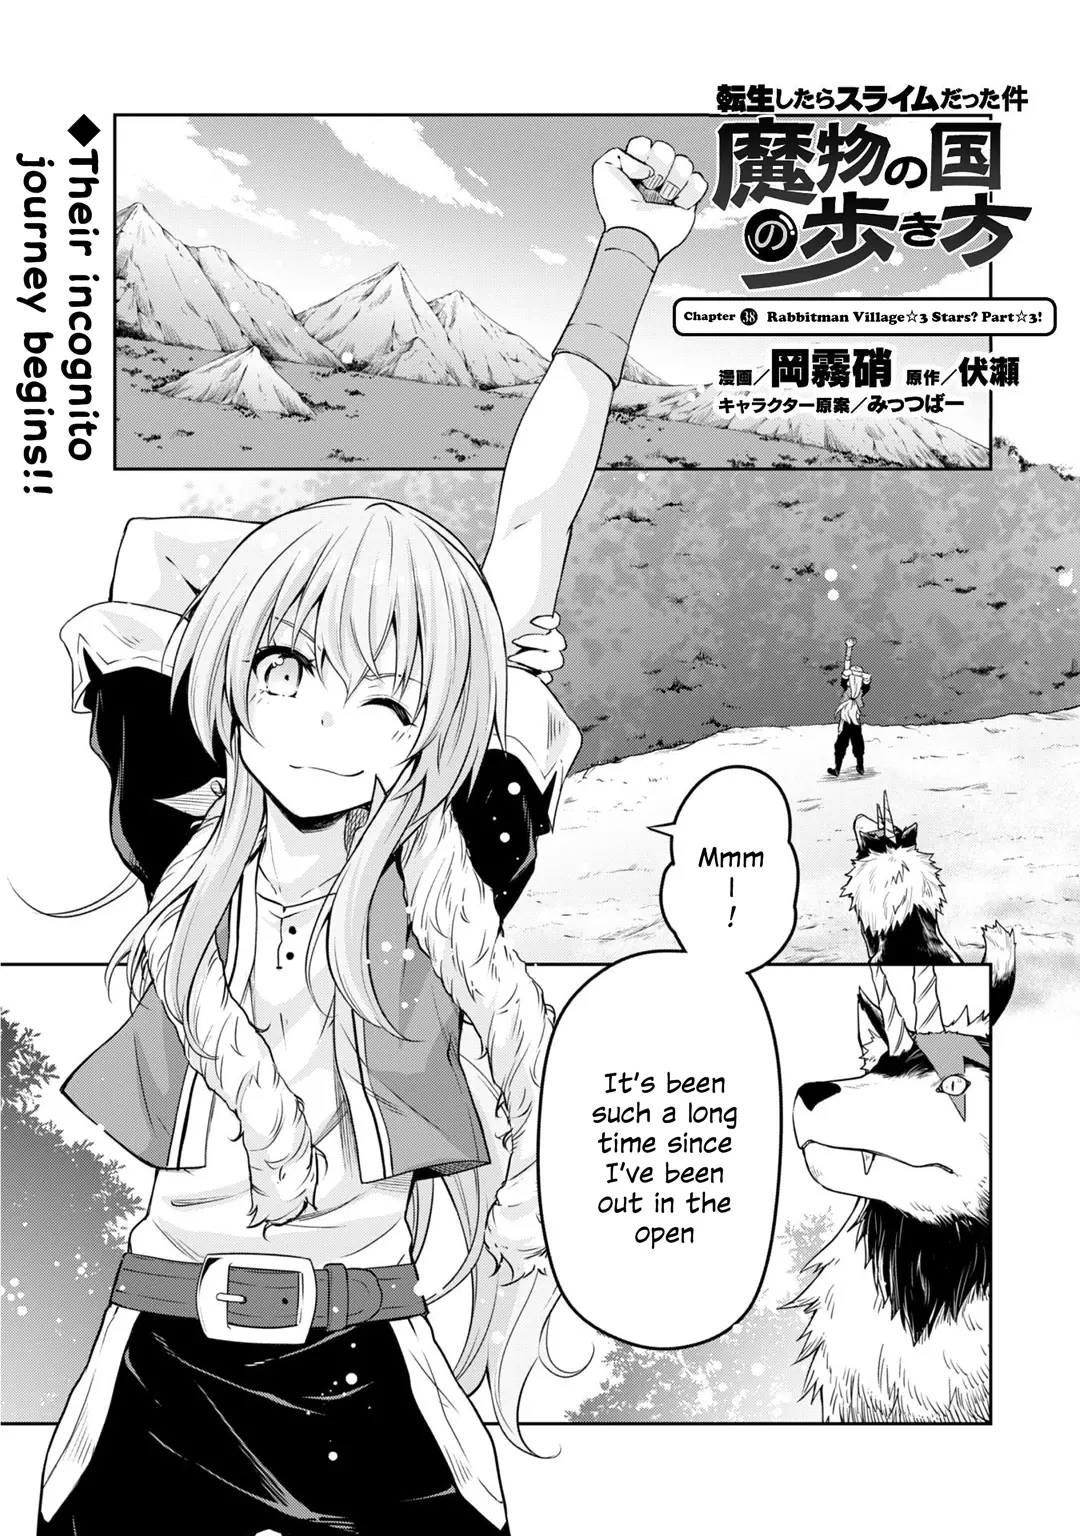 Tensei Shitara Slime Datta Ken: The Ways of Strolling in the Demon Country - 38 page 1